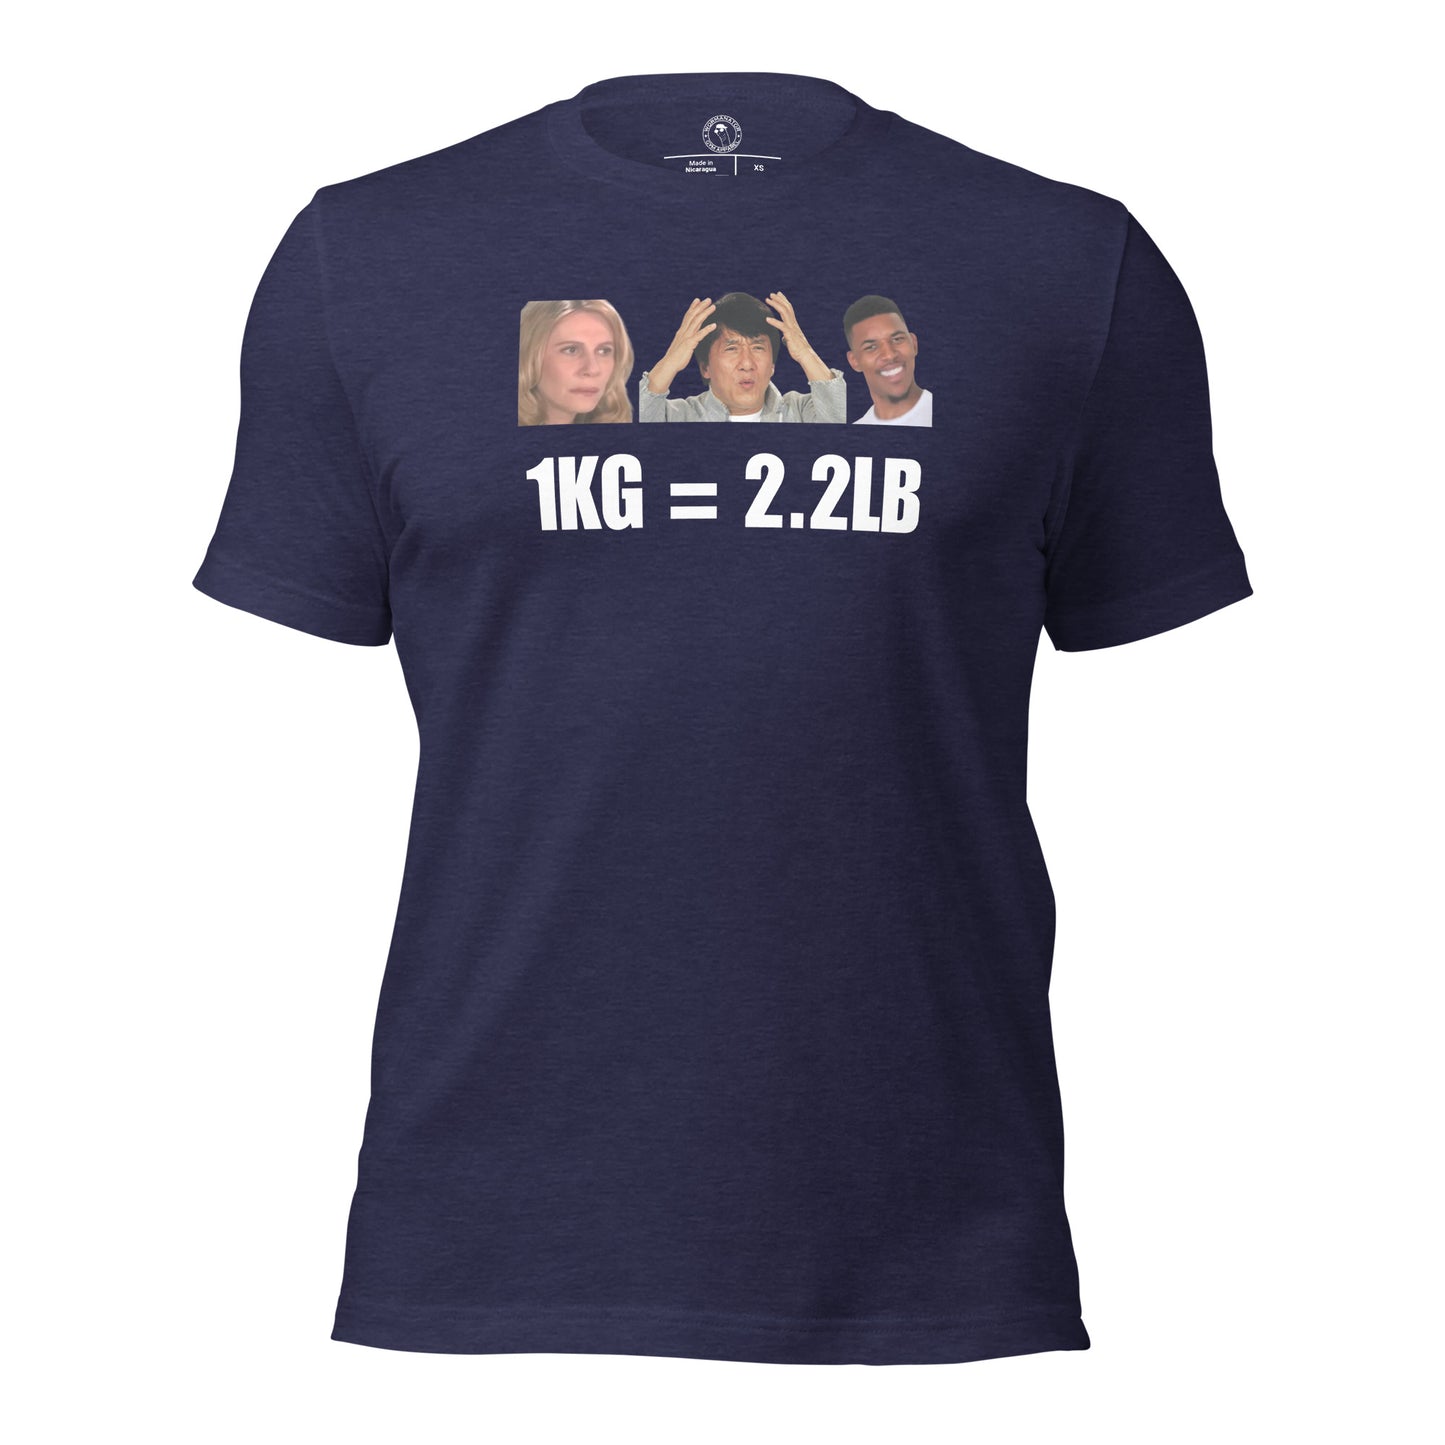 1kg = 2.2lb Powerlifting Conversion Shirt in Heather Midnight Navy